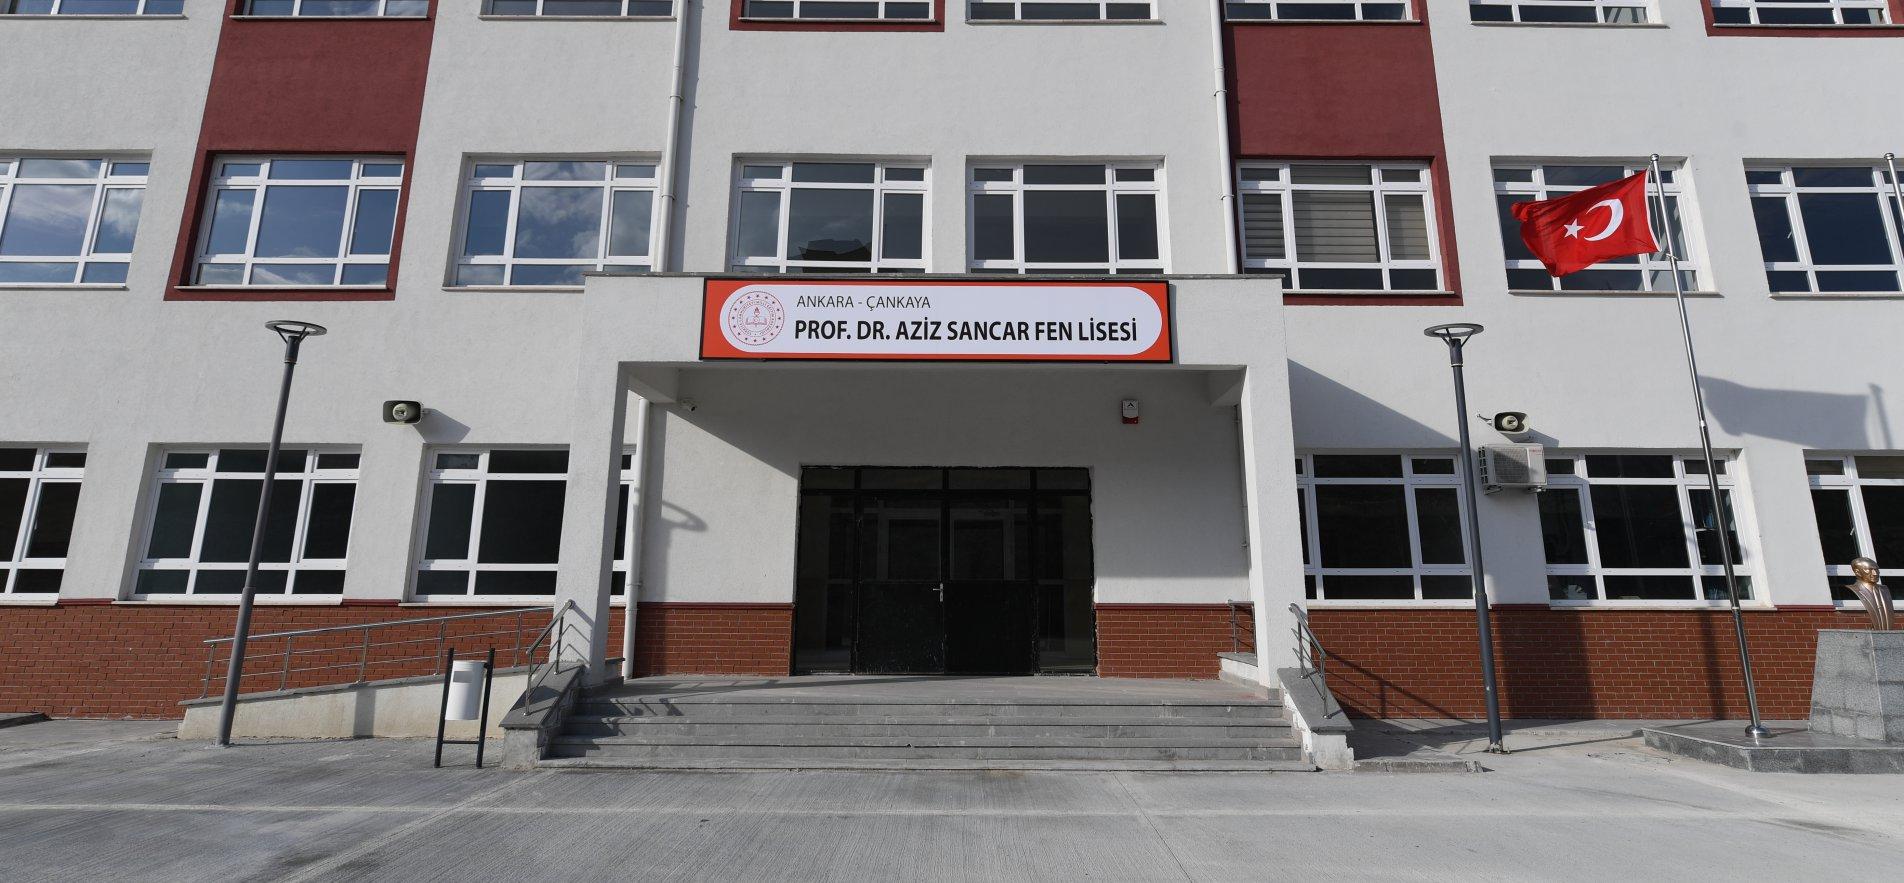 AZIZ SANCAR EDUCATION CAMPUS WILL BE FOUNDED IN THE CAPITAL CITY